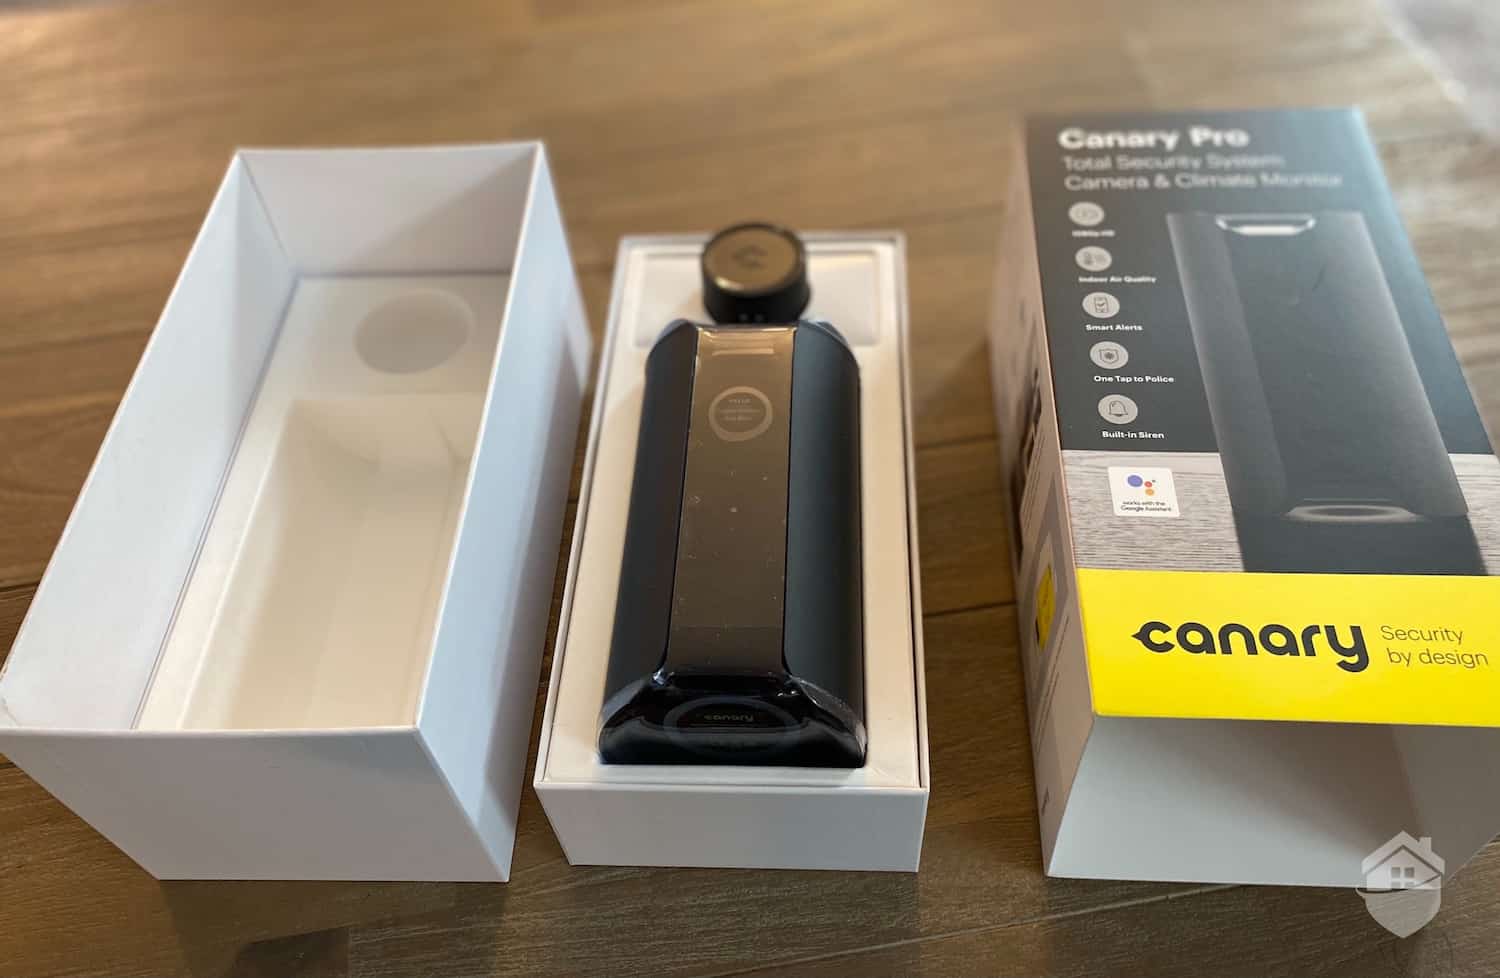 Unboxing the Canary Pro